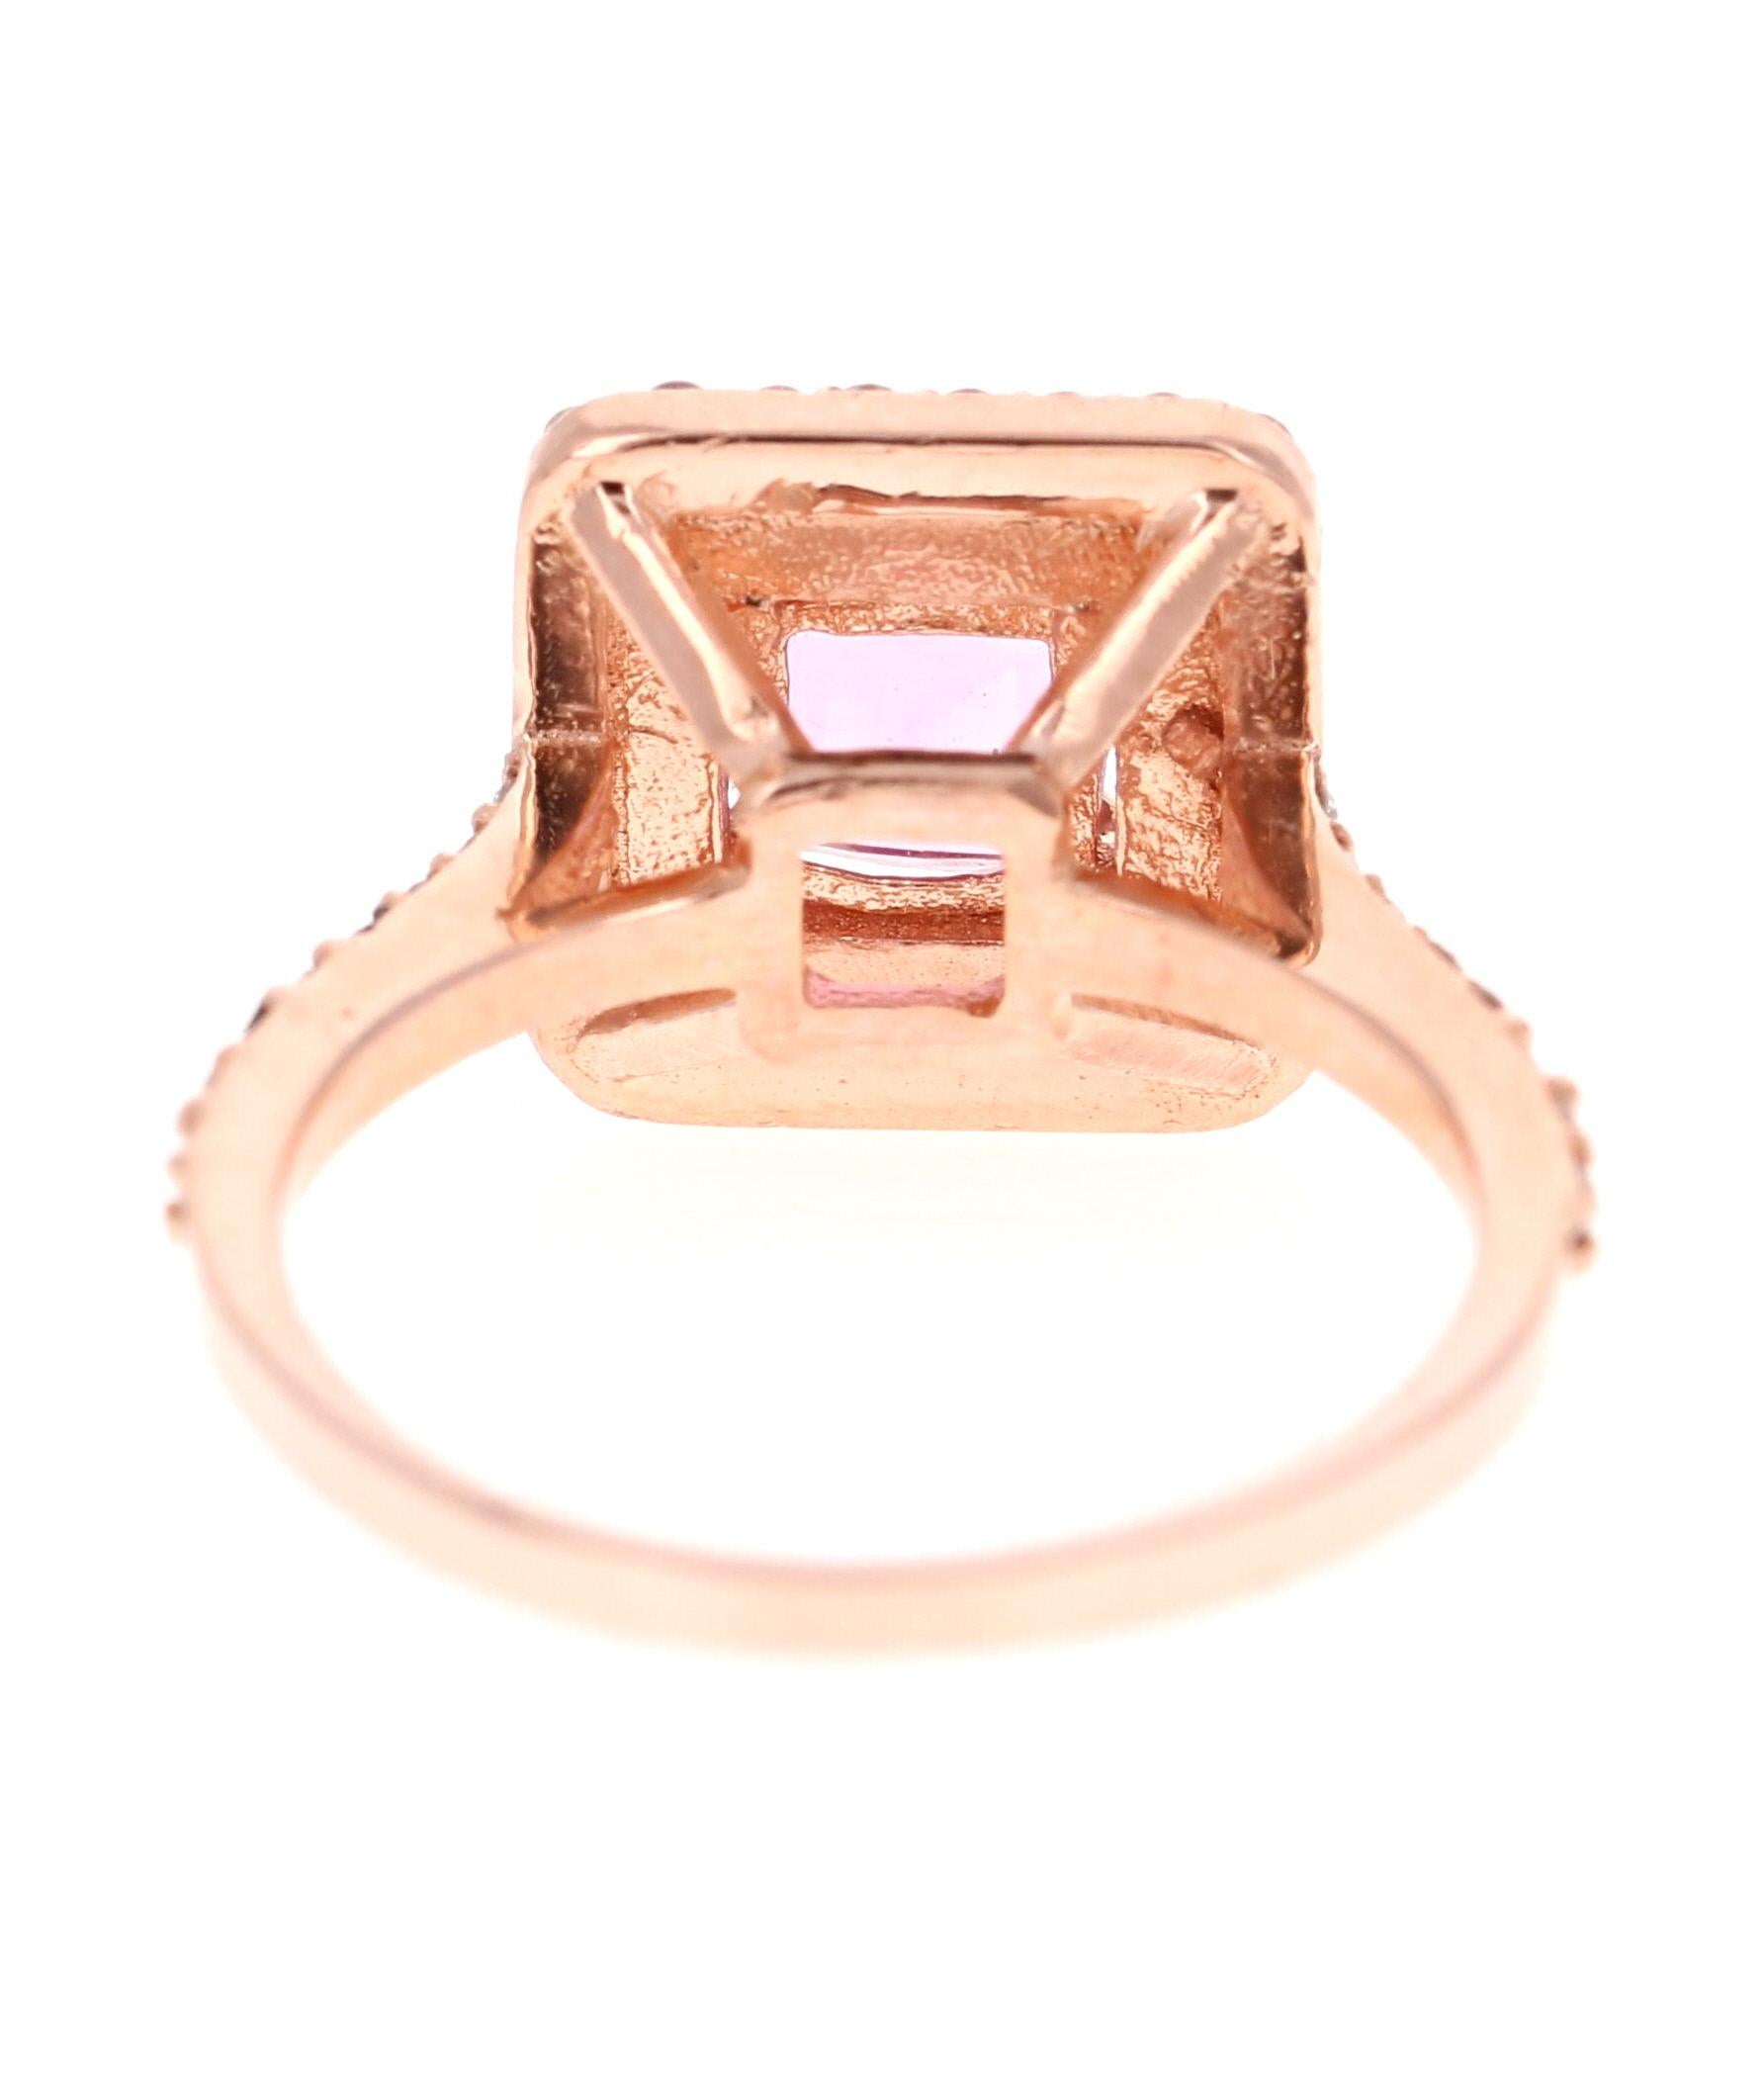 1.68 Carat Cushion Cut Pink Sapphire Diamond 14 Karat Rose Gold Bridal Ring In New Condition For Sale In Los Angeles, CA